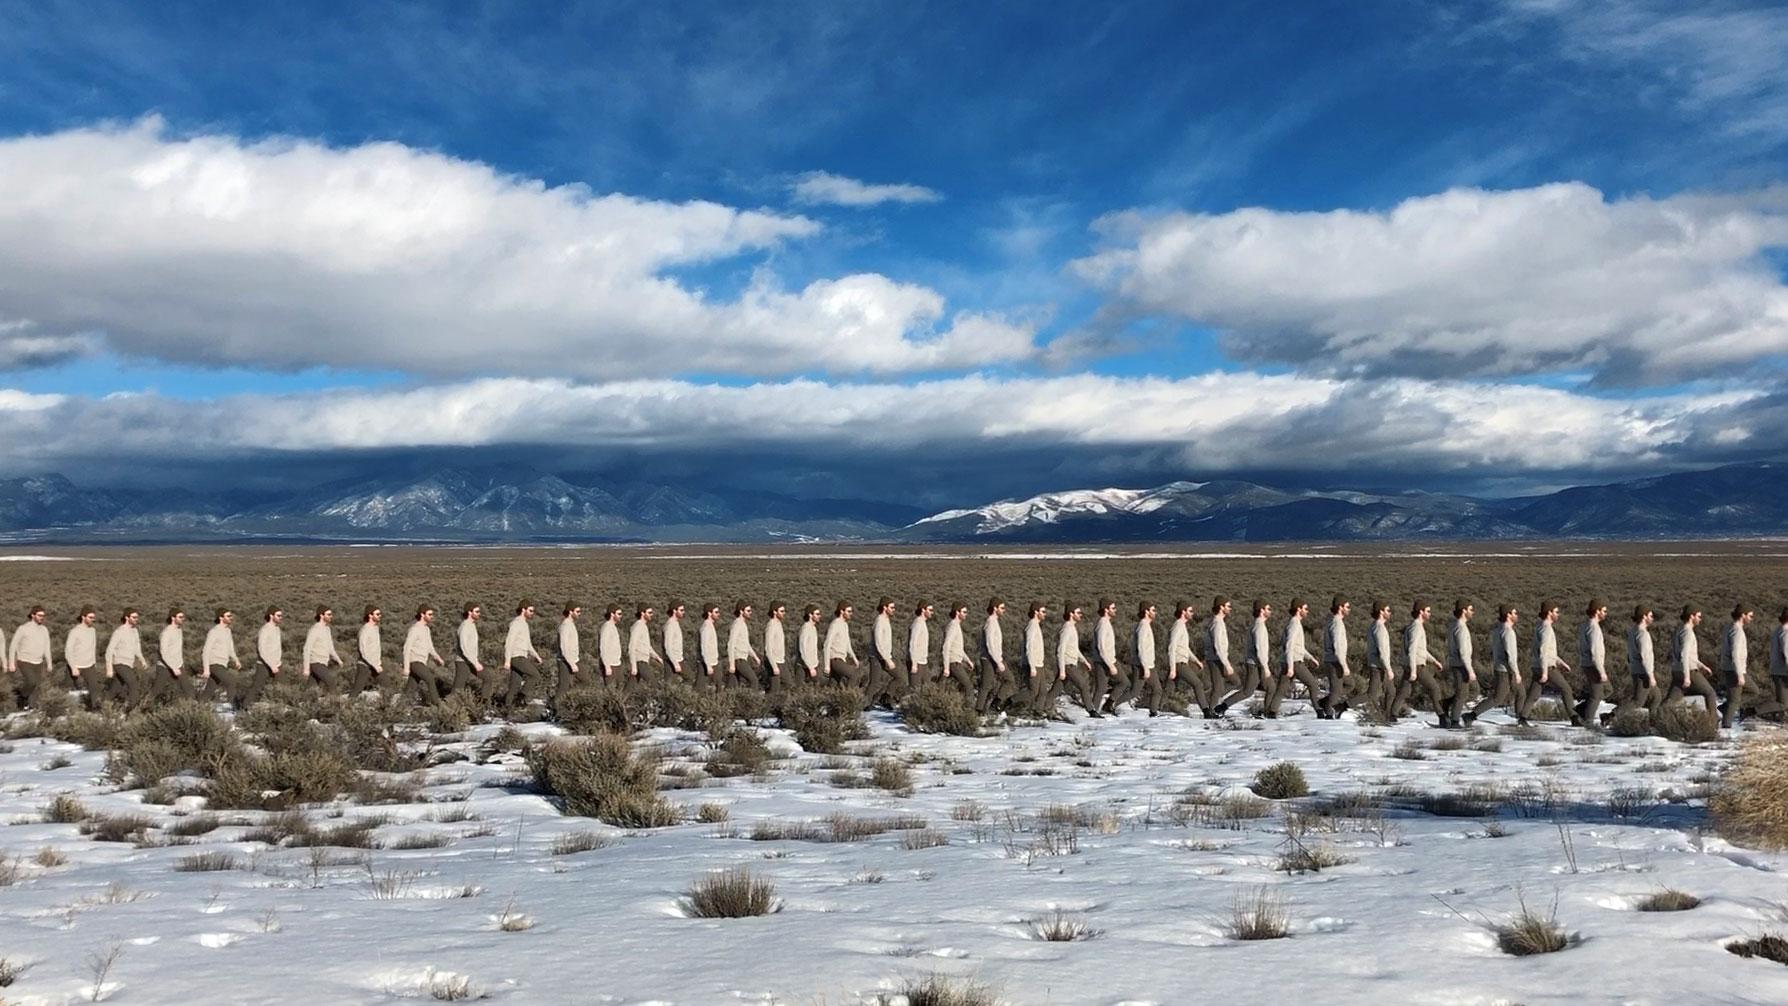 Andrew Herzog Figurative Photograph - "Walking Line in New Mexico" - Figurative Landscape Photography - Goldsworthy